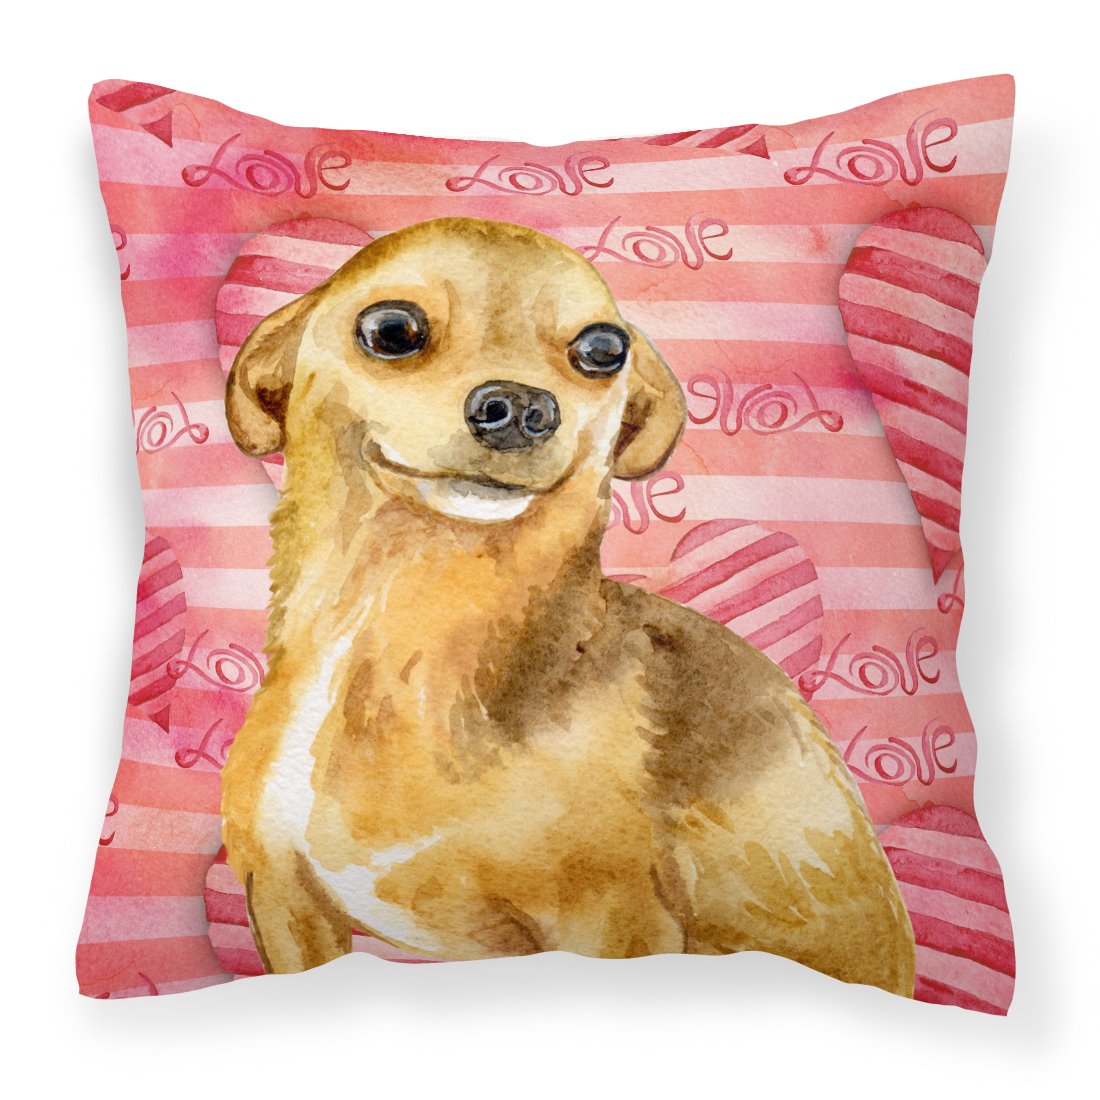 Chihuahua Love Fabric Decorative Pillow BB9745PW1818 by Caroline's Treasures